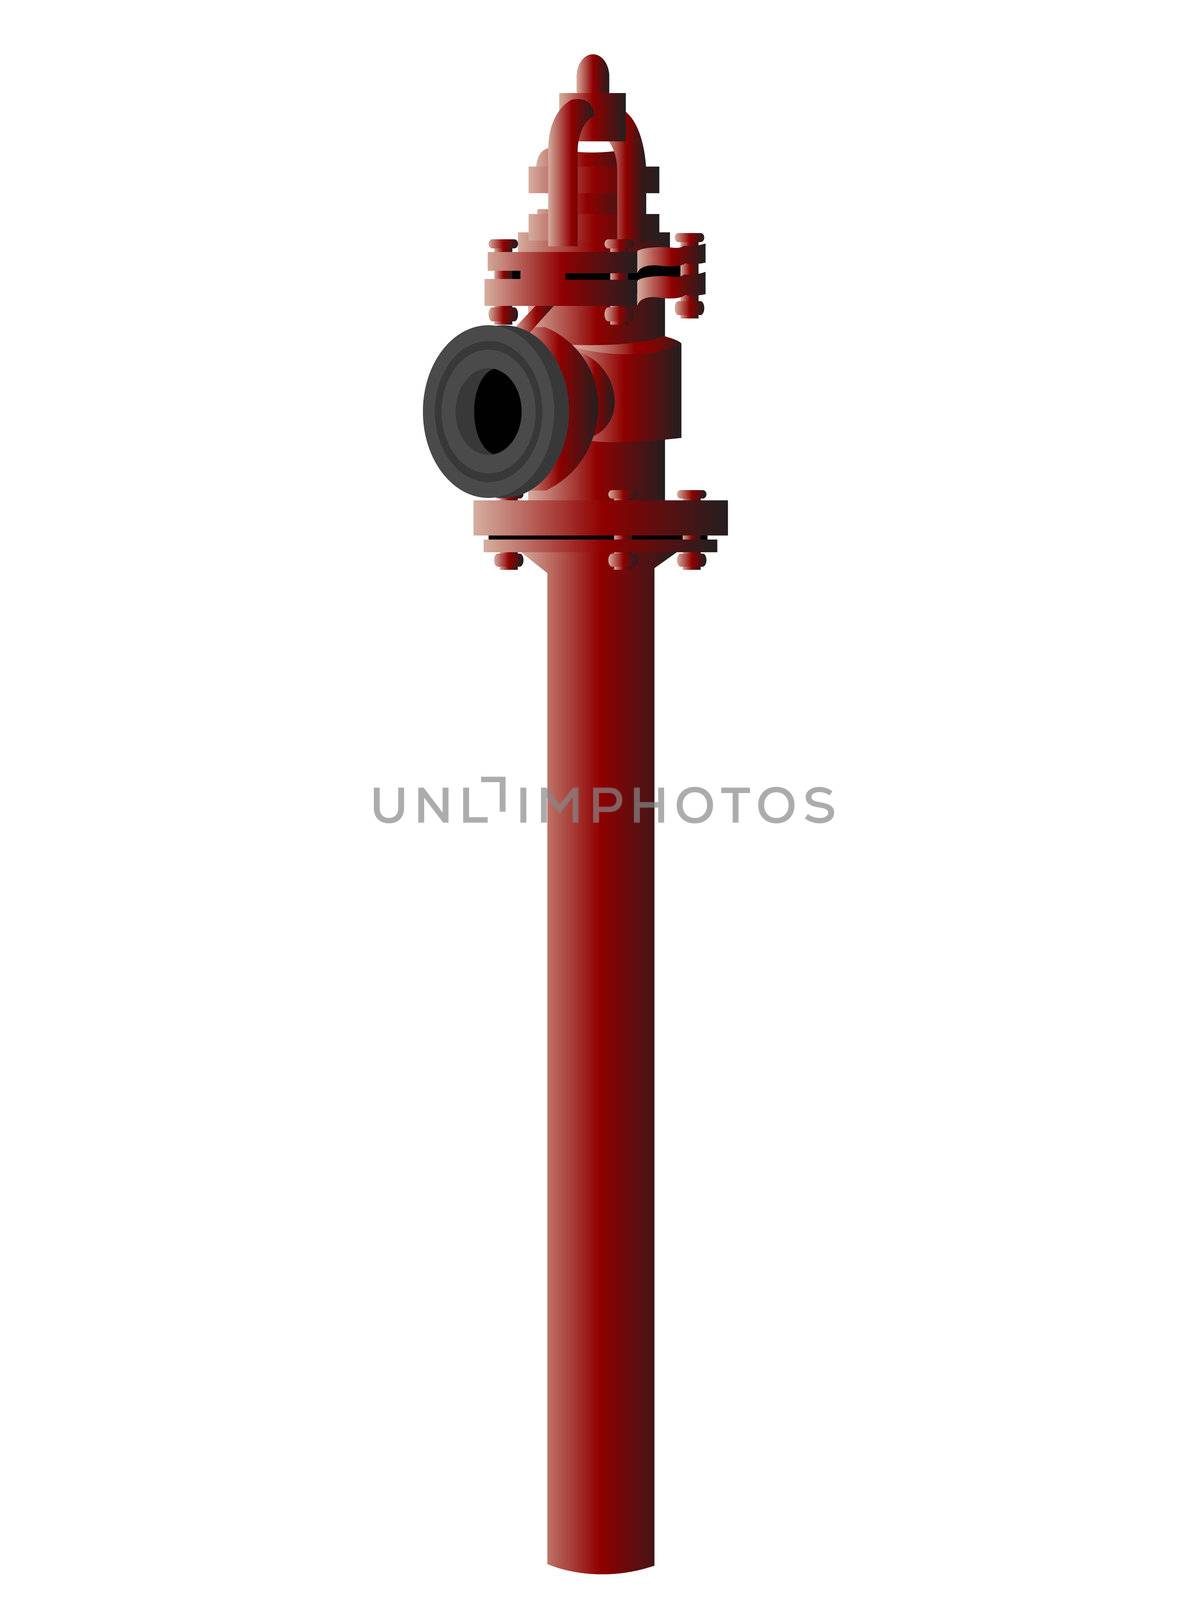 fire hydrant by imagerymajestic